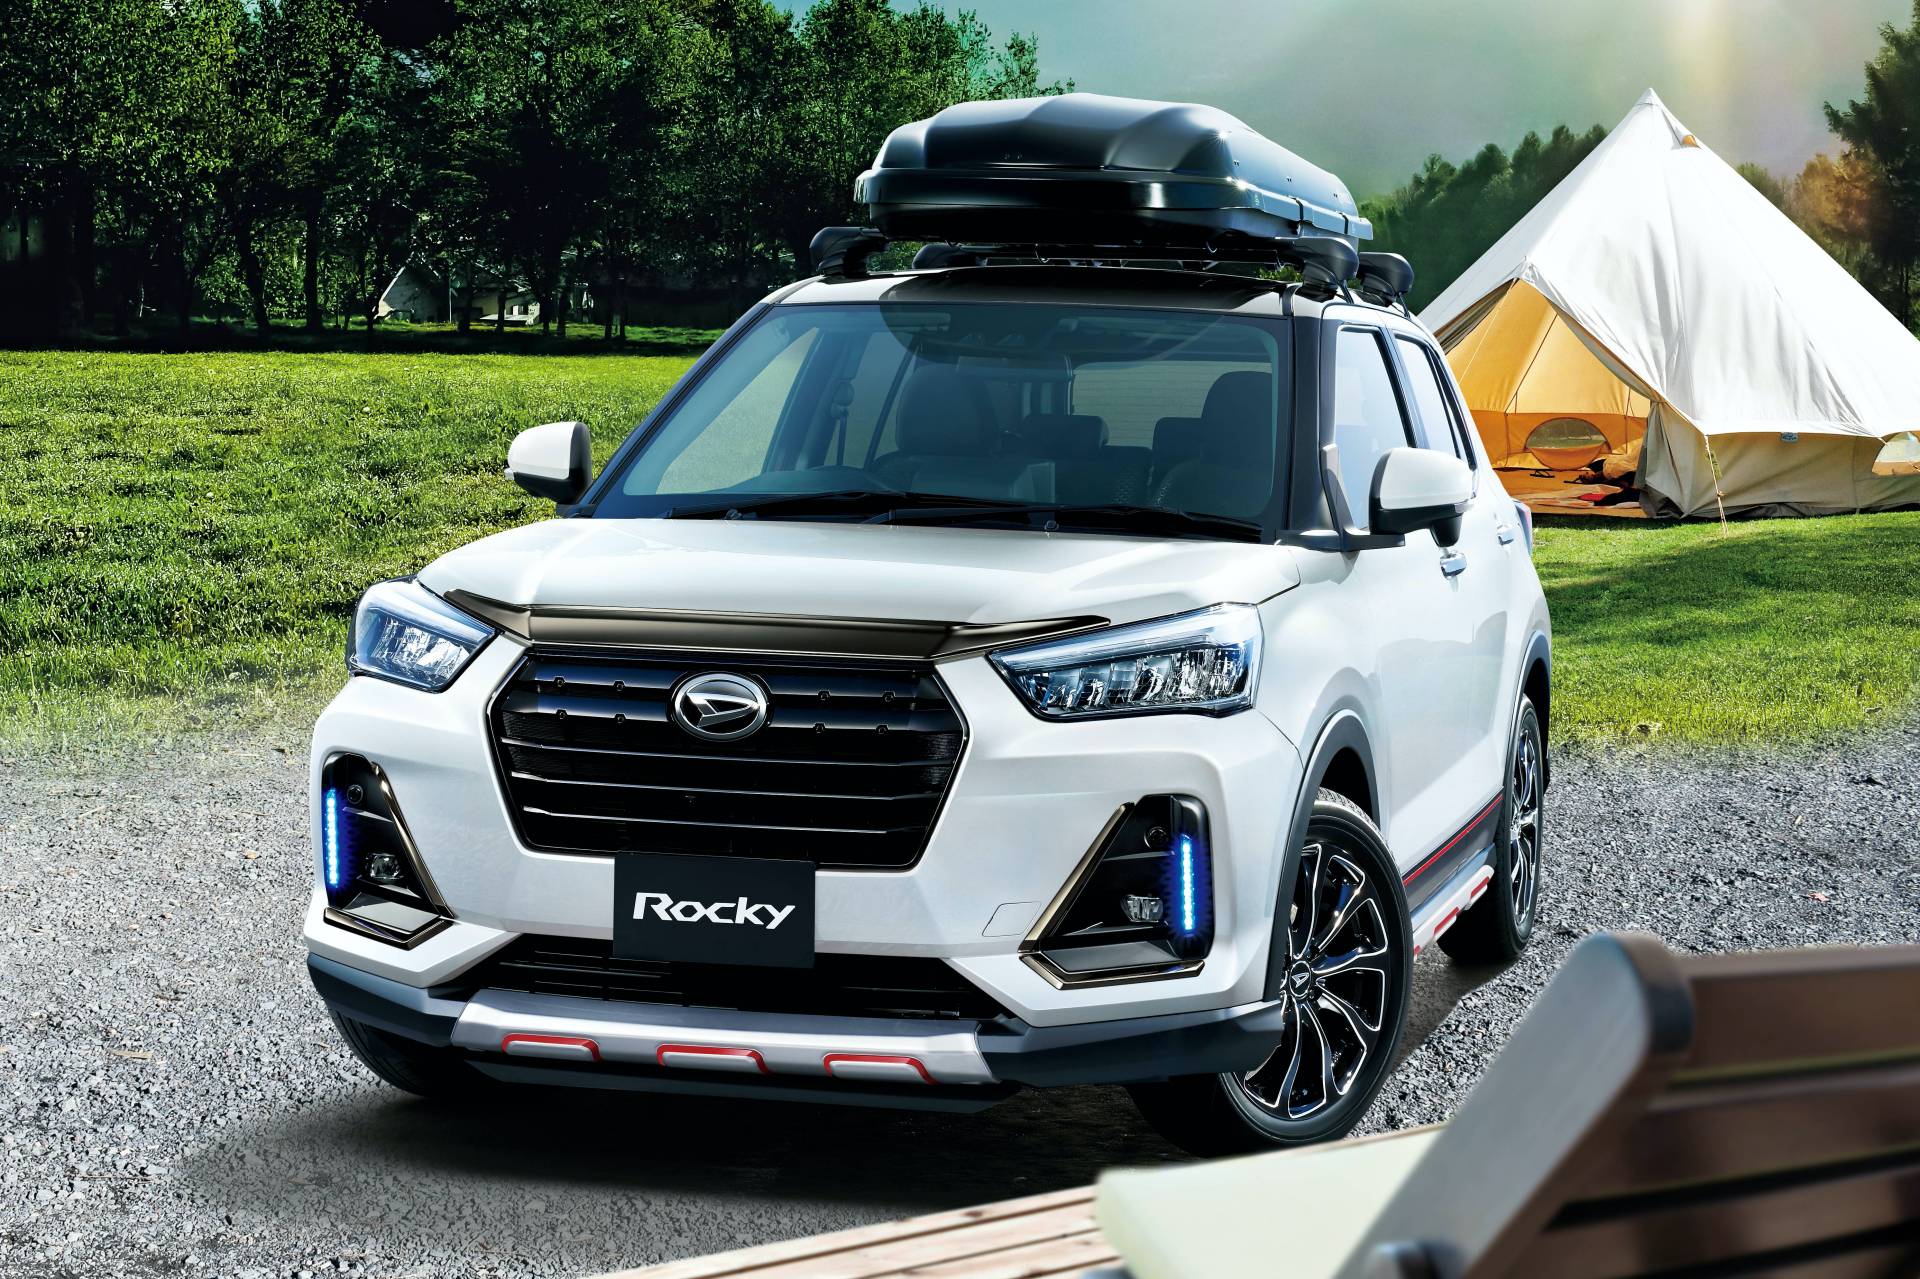 2022 Daihatsu Rocky  Launches In Japan With Factory Tuning 